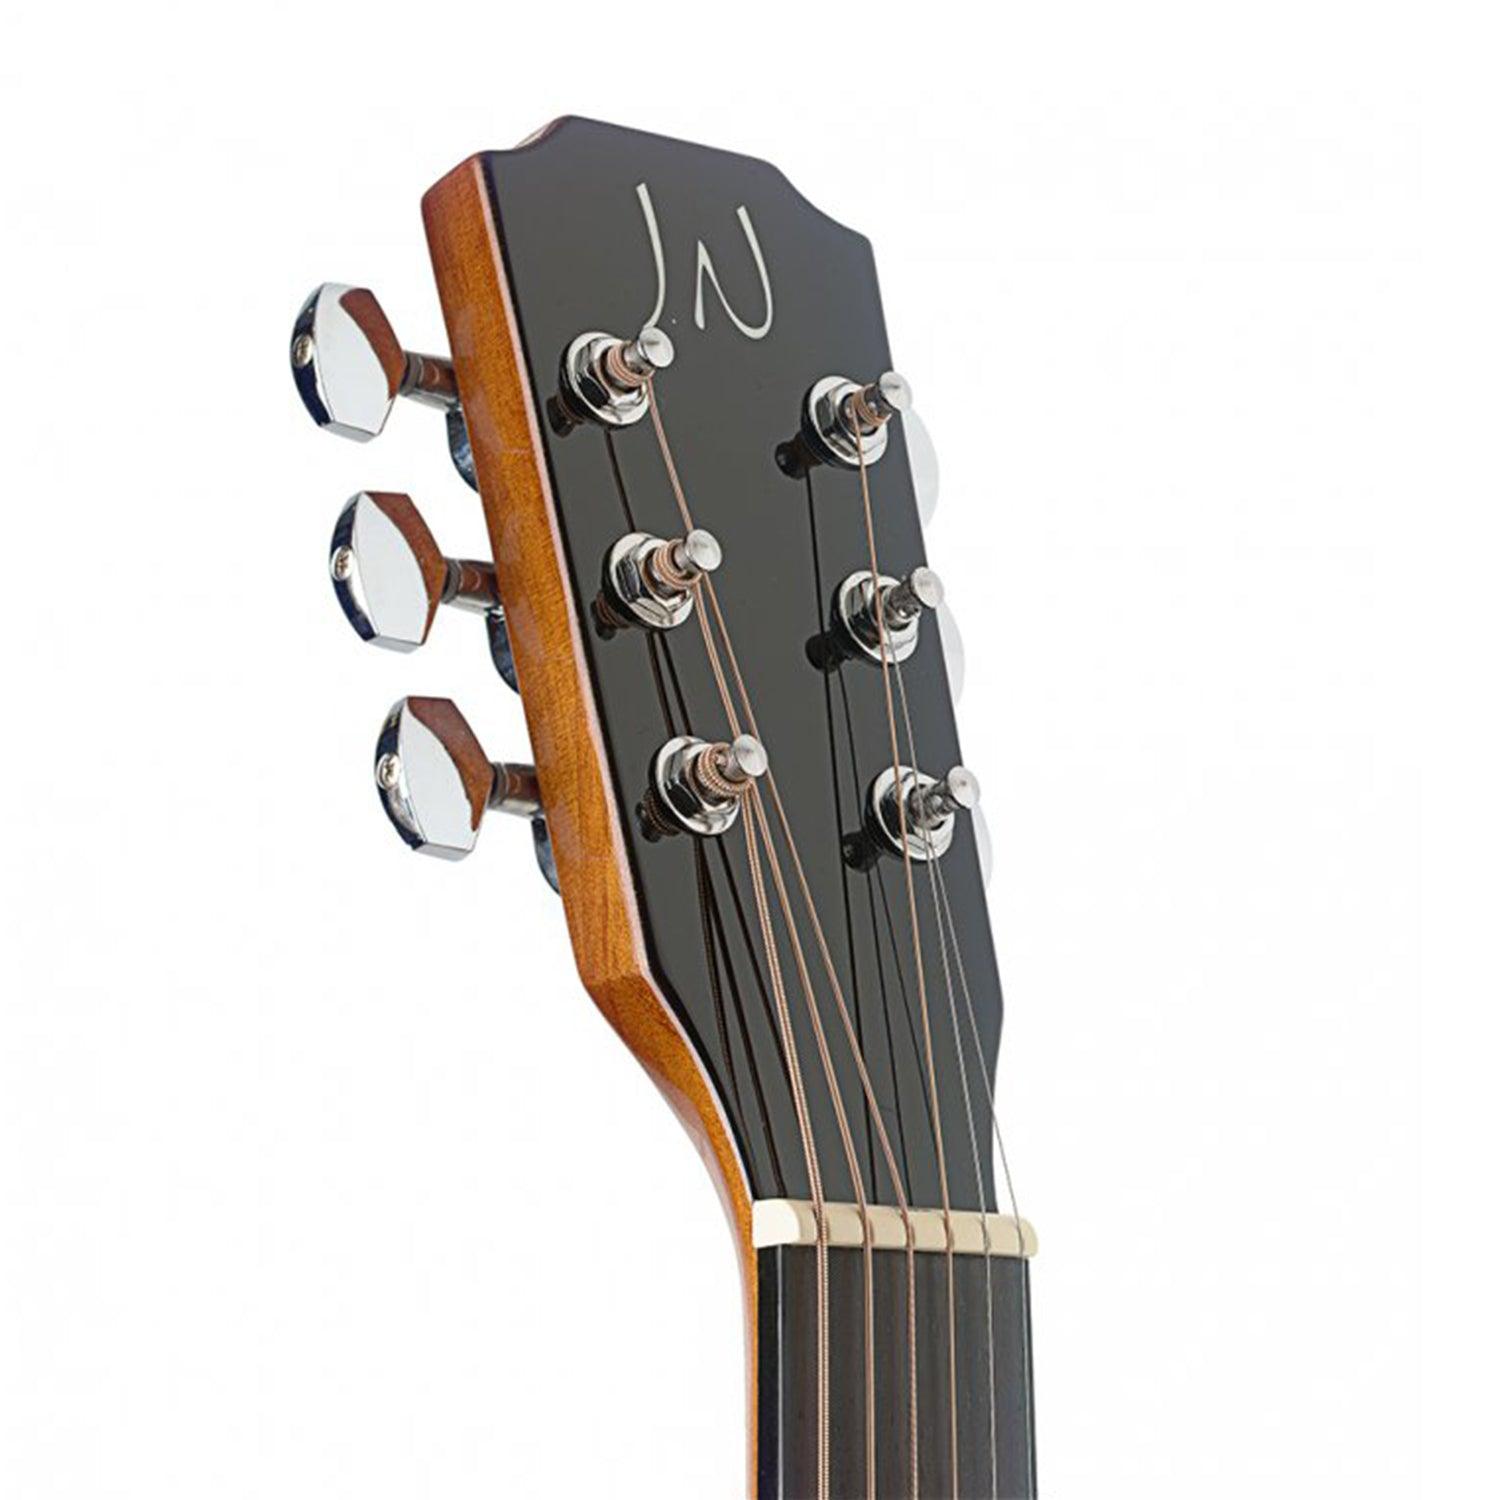 J.N Guitars BES-A N Natural-Coloured Acoustic Auditorium Guitar with Solid Spruce Top, Bessie series - DY Pro Audio